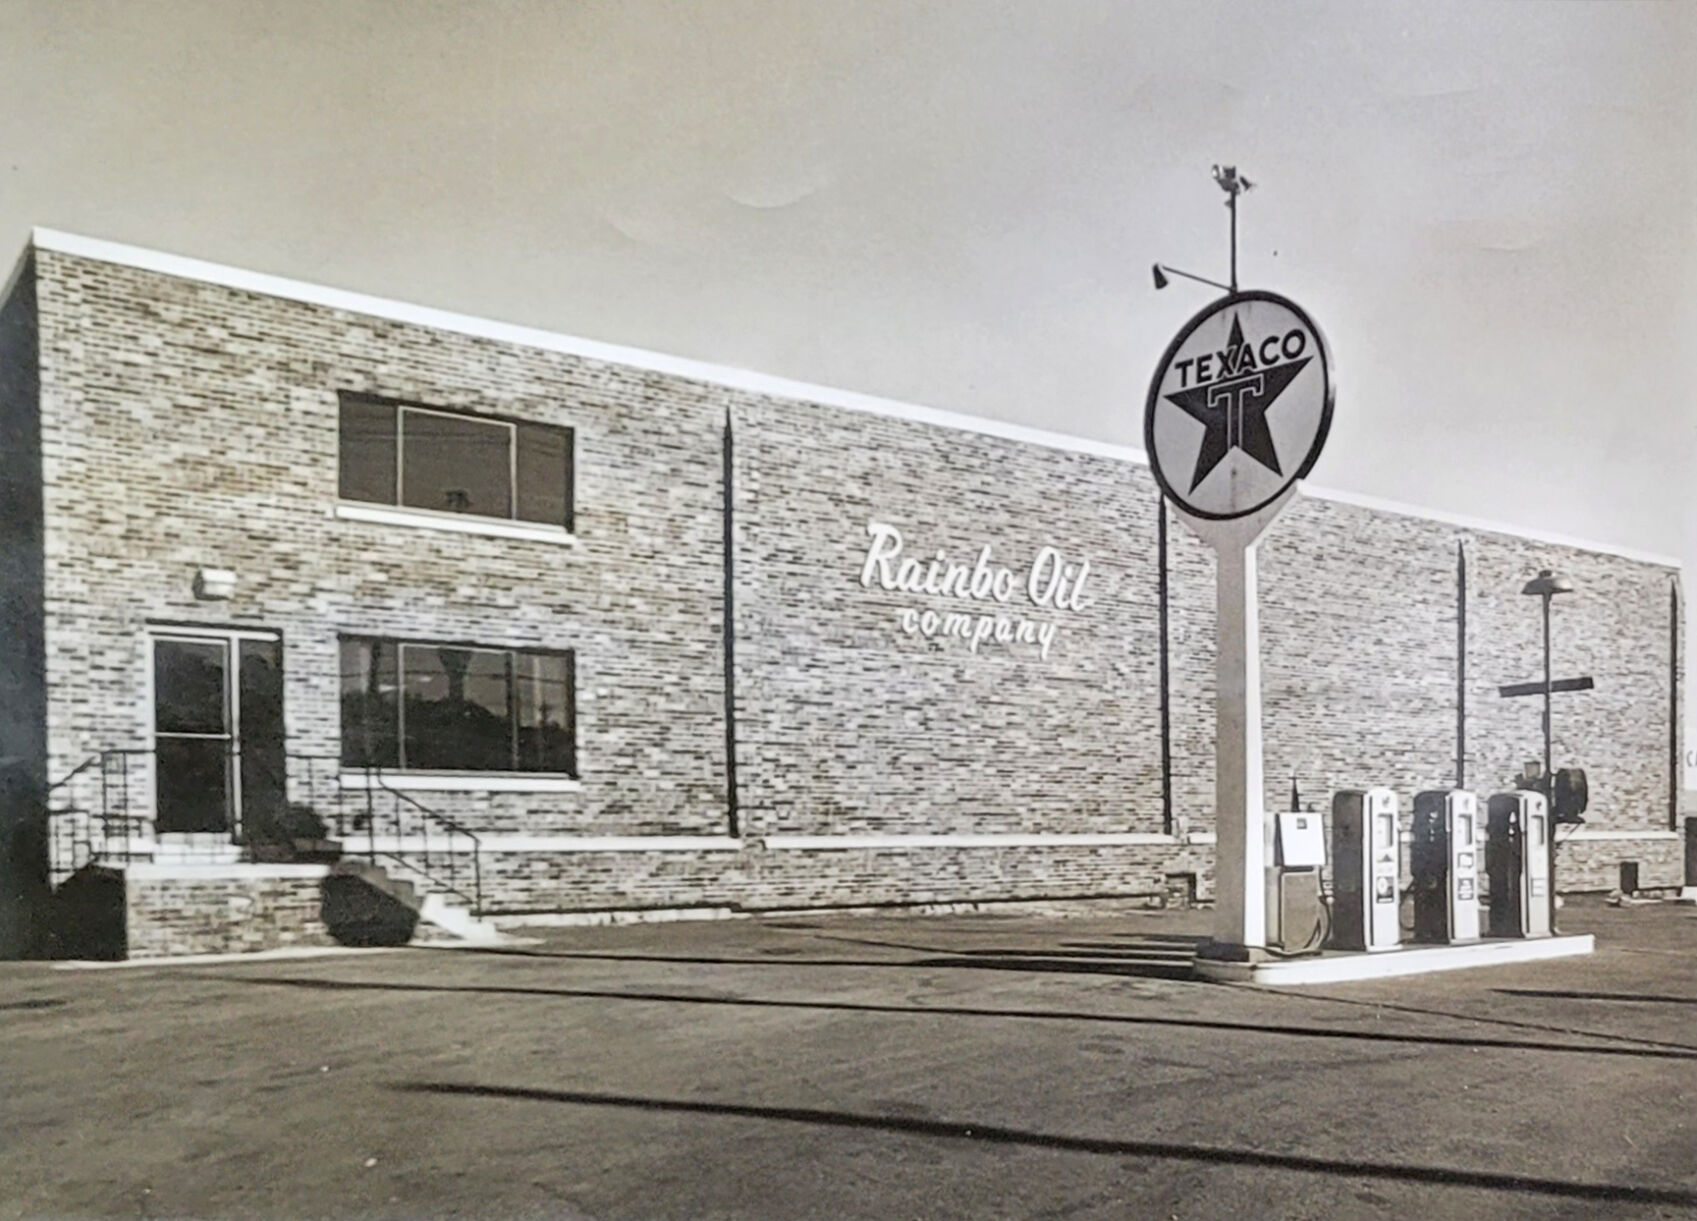 The Rainbo Oil Co. building at 300 South Main St. as it looked from 1971 to 1986.    PHOTO CREDIT: Contributed